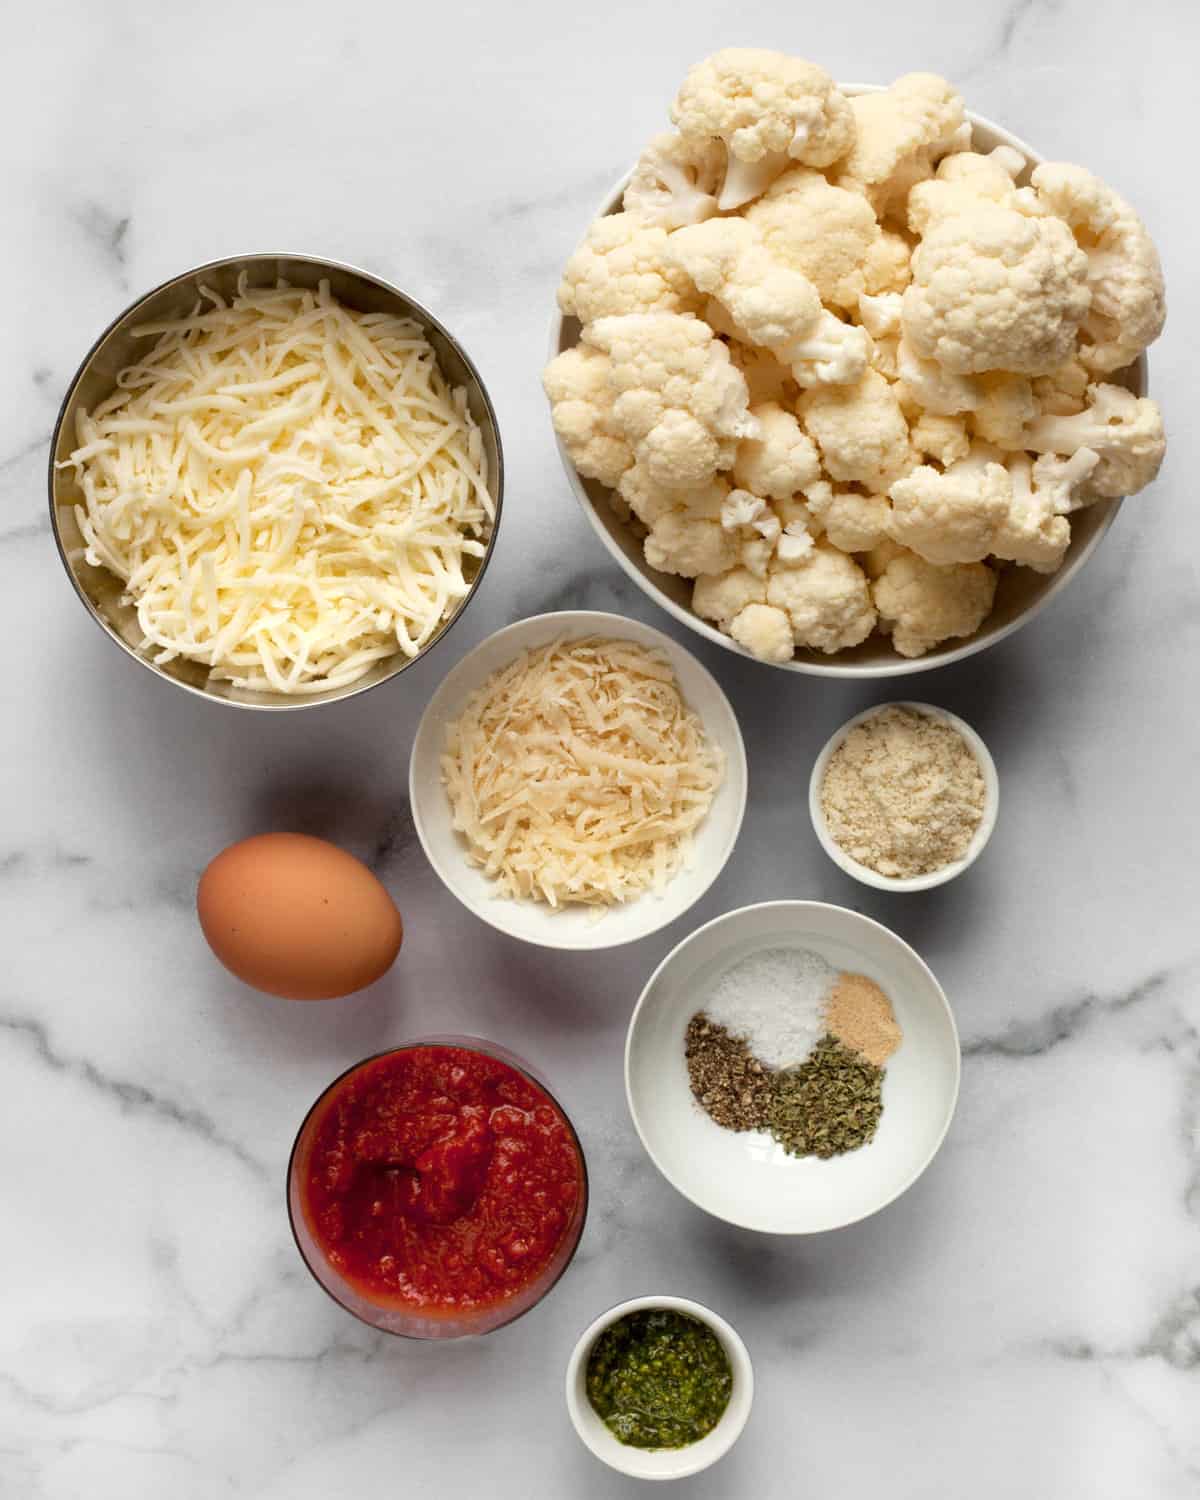 Ingredients including cauliflower, cheese, spices, almond flour, egg, pizza sauce and pesto.